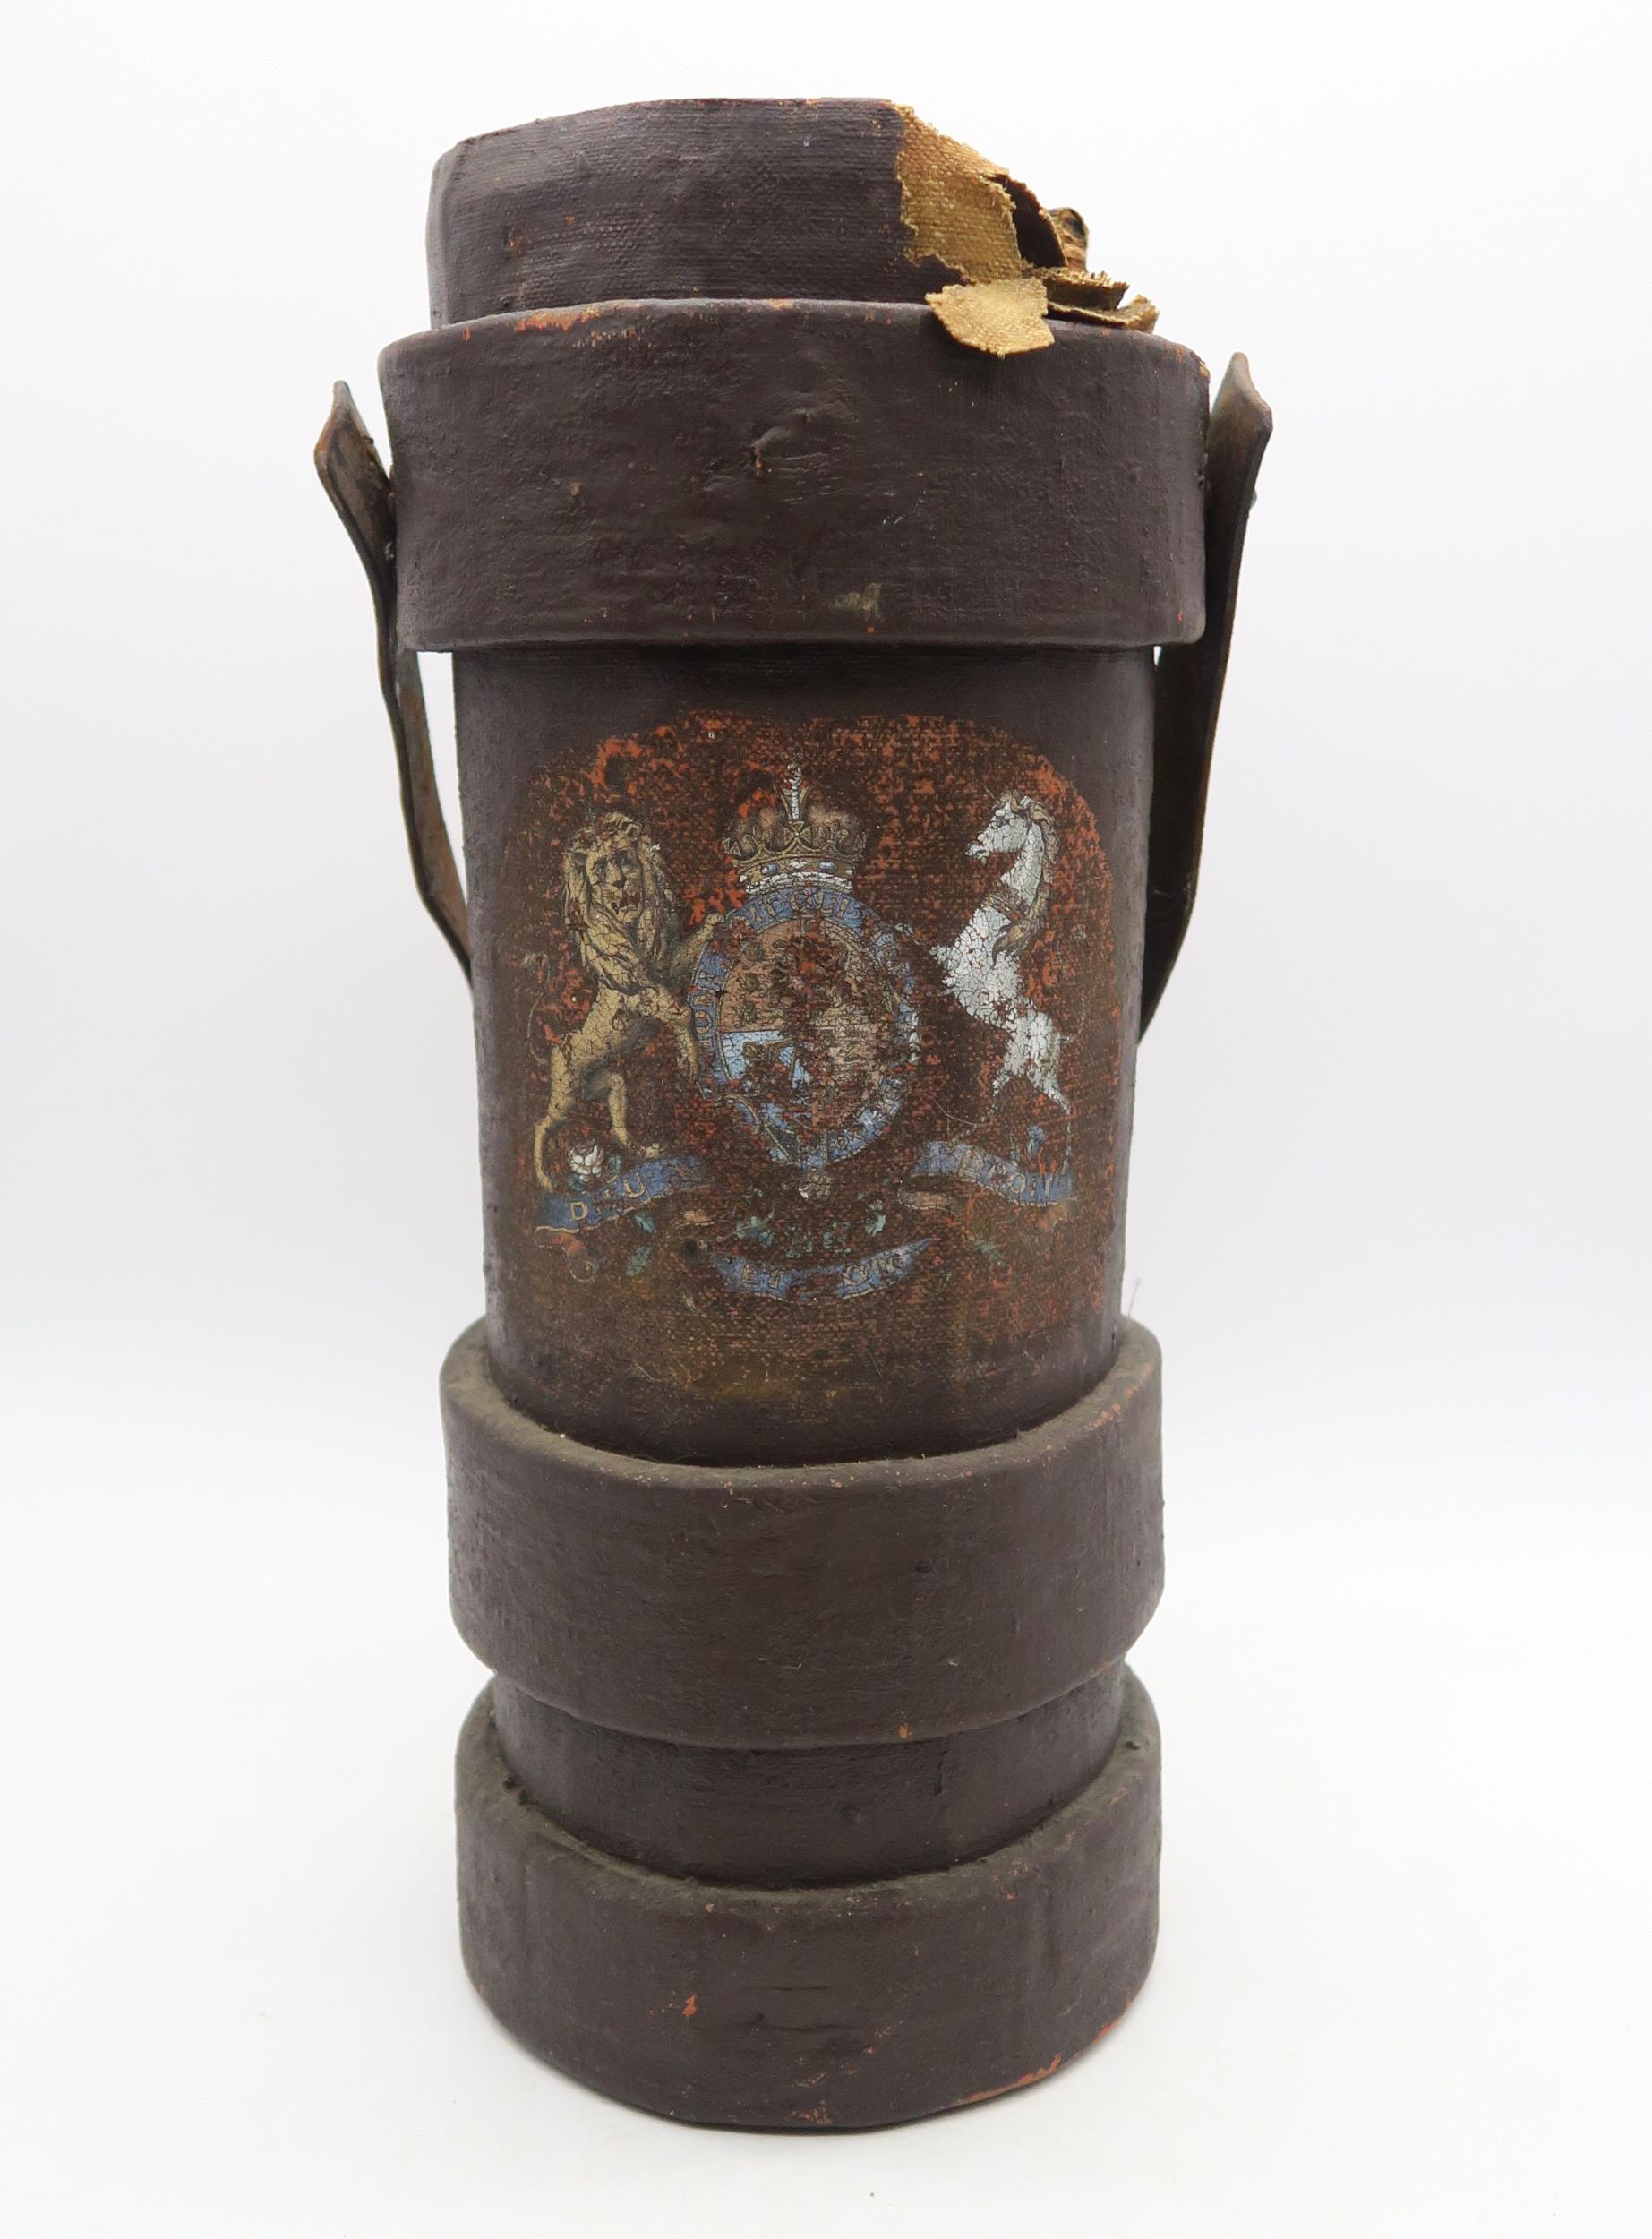 An artillery shell carrier, constructed from painted canvas over a cork base, measuring approx. 46cm